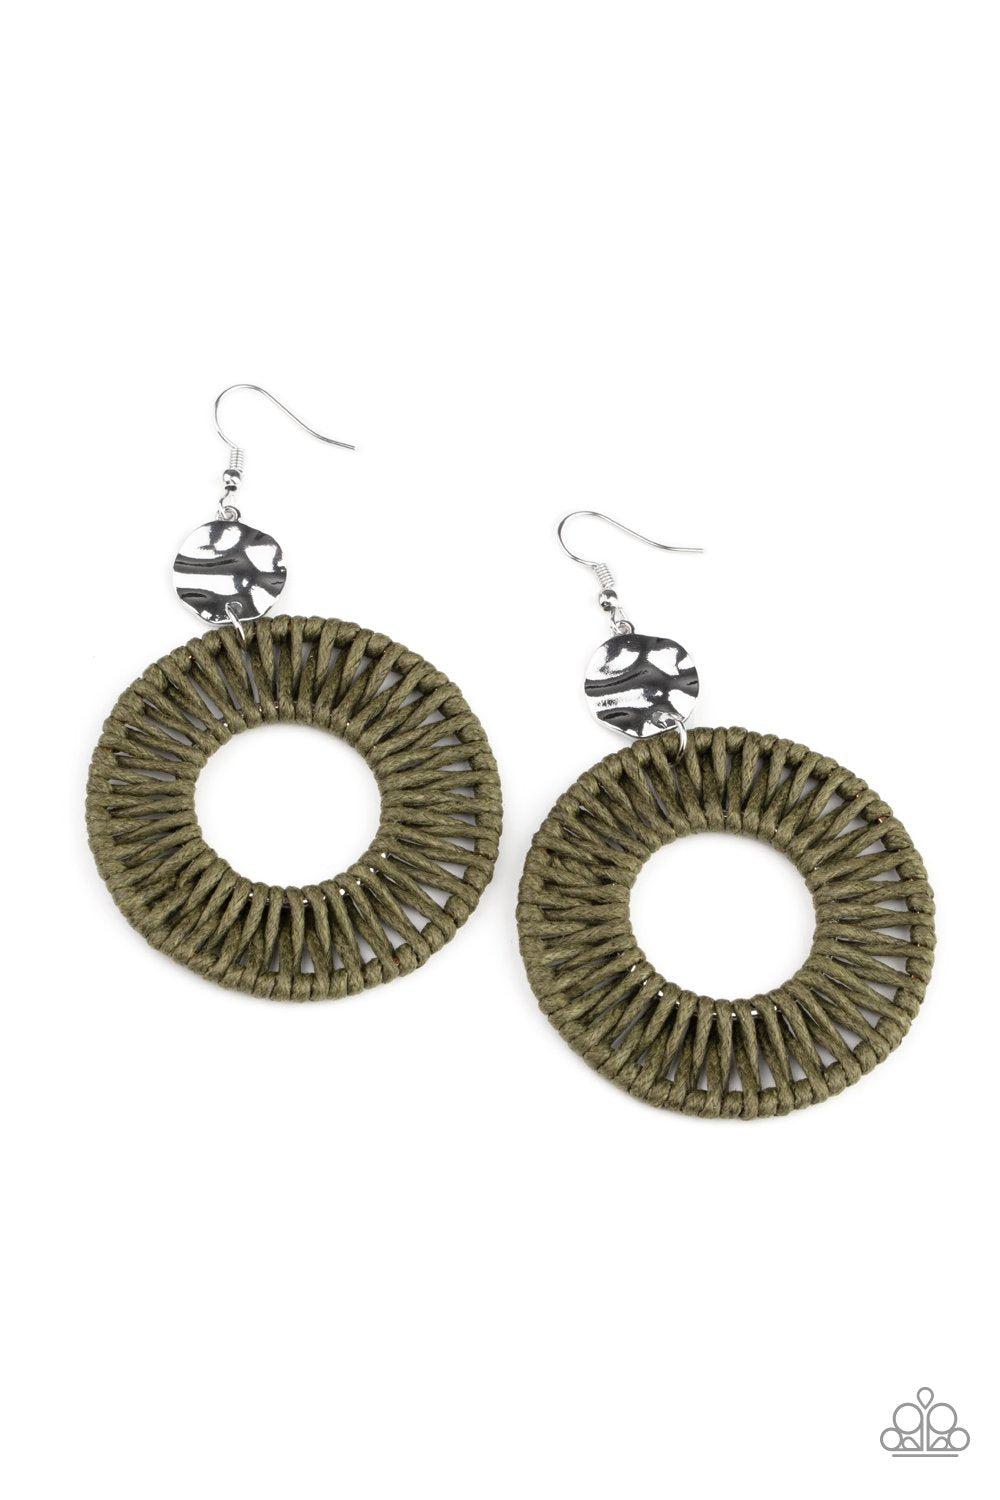 Total Basket Case Green Woven Hoop Earrings - Paparazzi Accessories - lightbox -CarasShop.com - $5 Jewelry by Cara Jewels